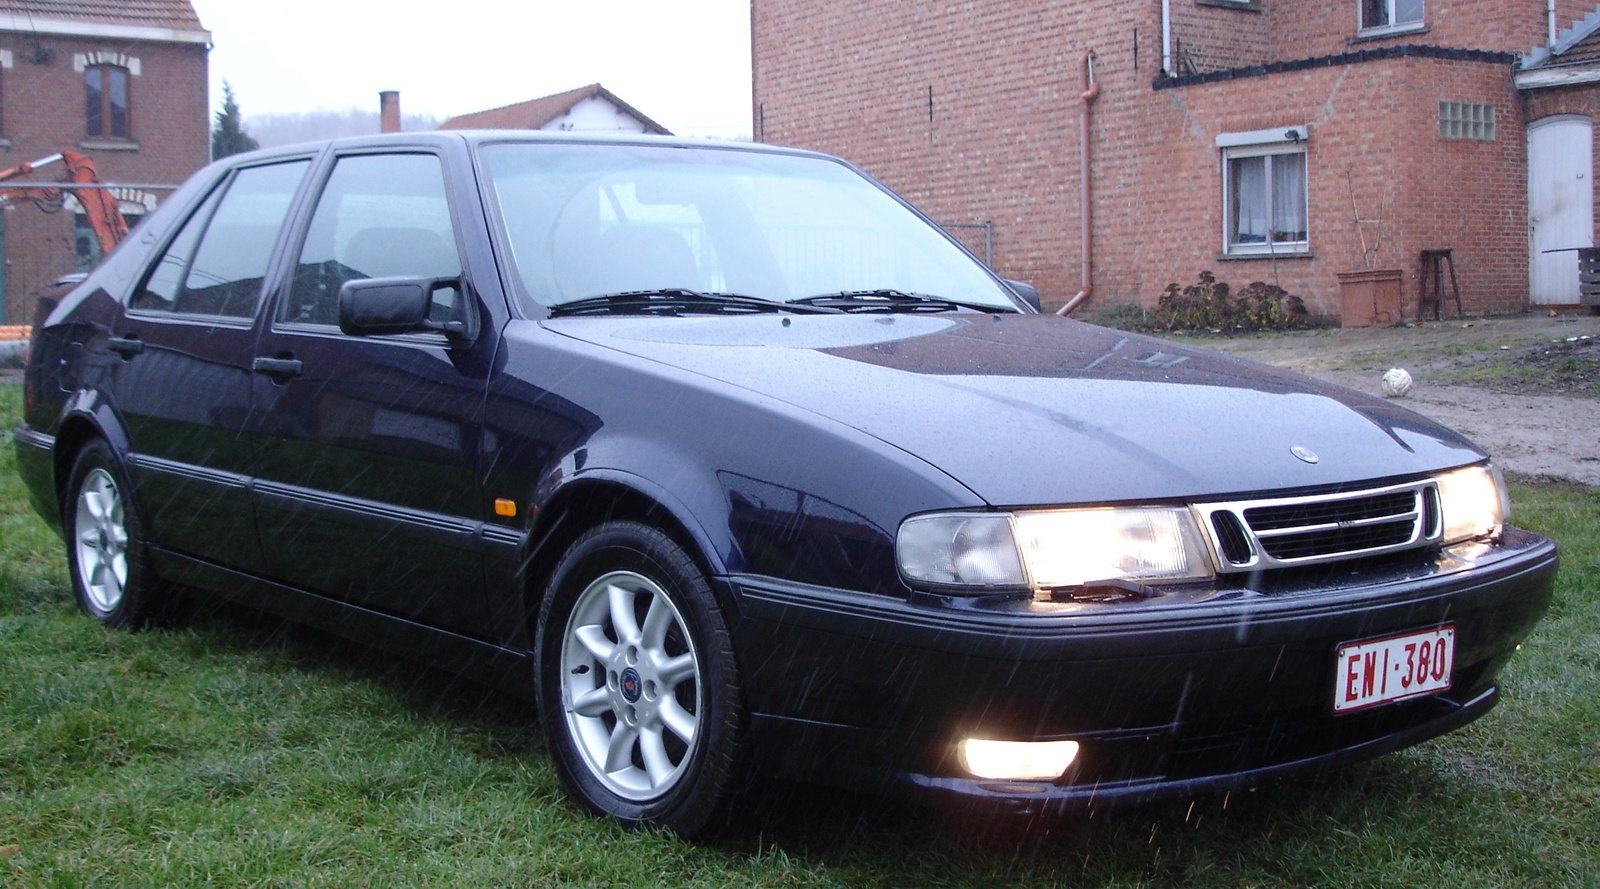 1997 Saab 9000 4 Dr CSE Anniversary Turbo Hatchback - Pictures ...